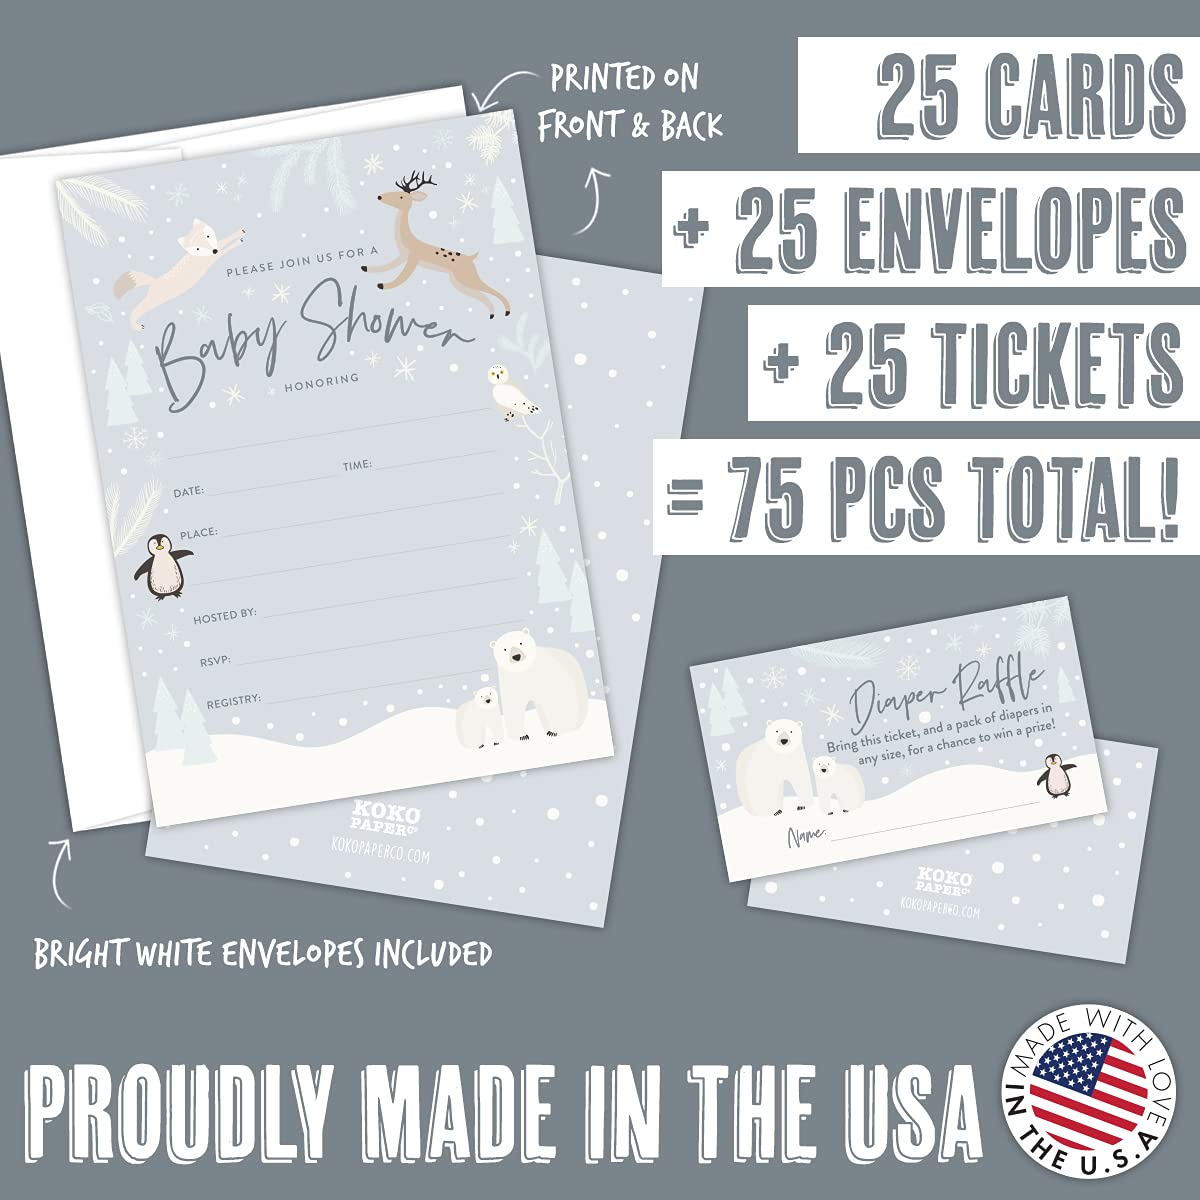 Koko Paper Co Snowy Winter Wonderland Baby Shower Invitations and Diaper Raffle Tickets | 25 Fill-in Invitations, 25 Bright White Envelopes and 25 Diaper Raffle Tickets | 75 pcs Total | Printed on Heavy Card Stock.